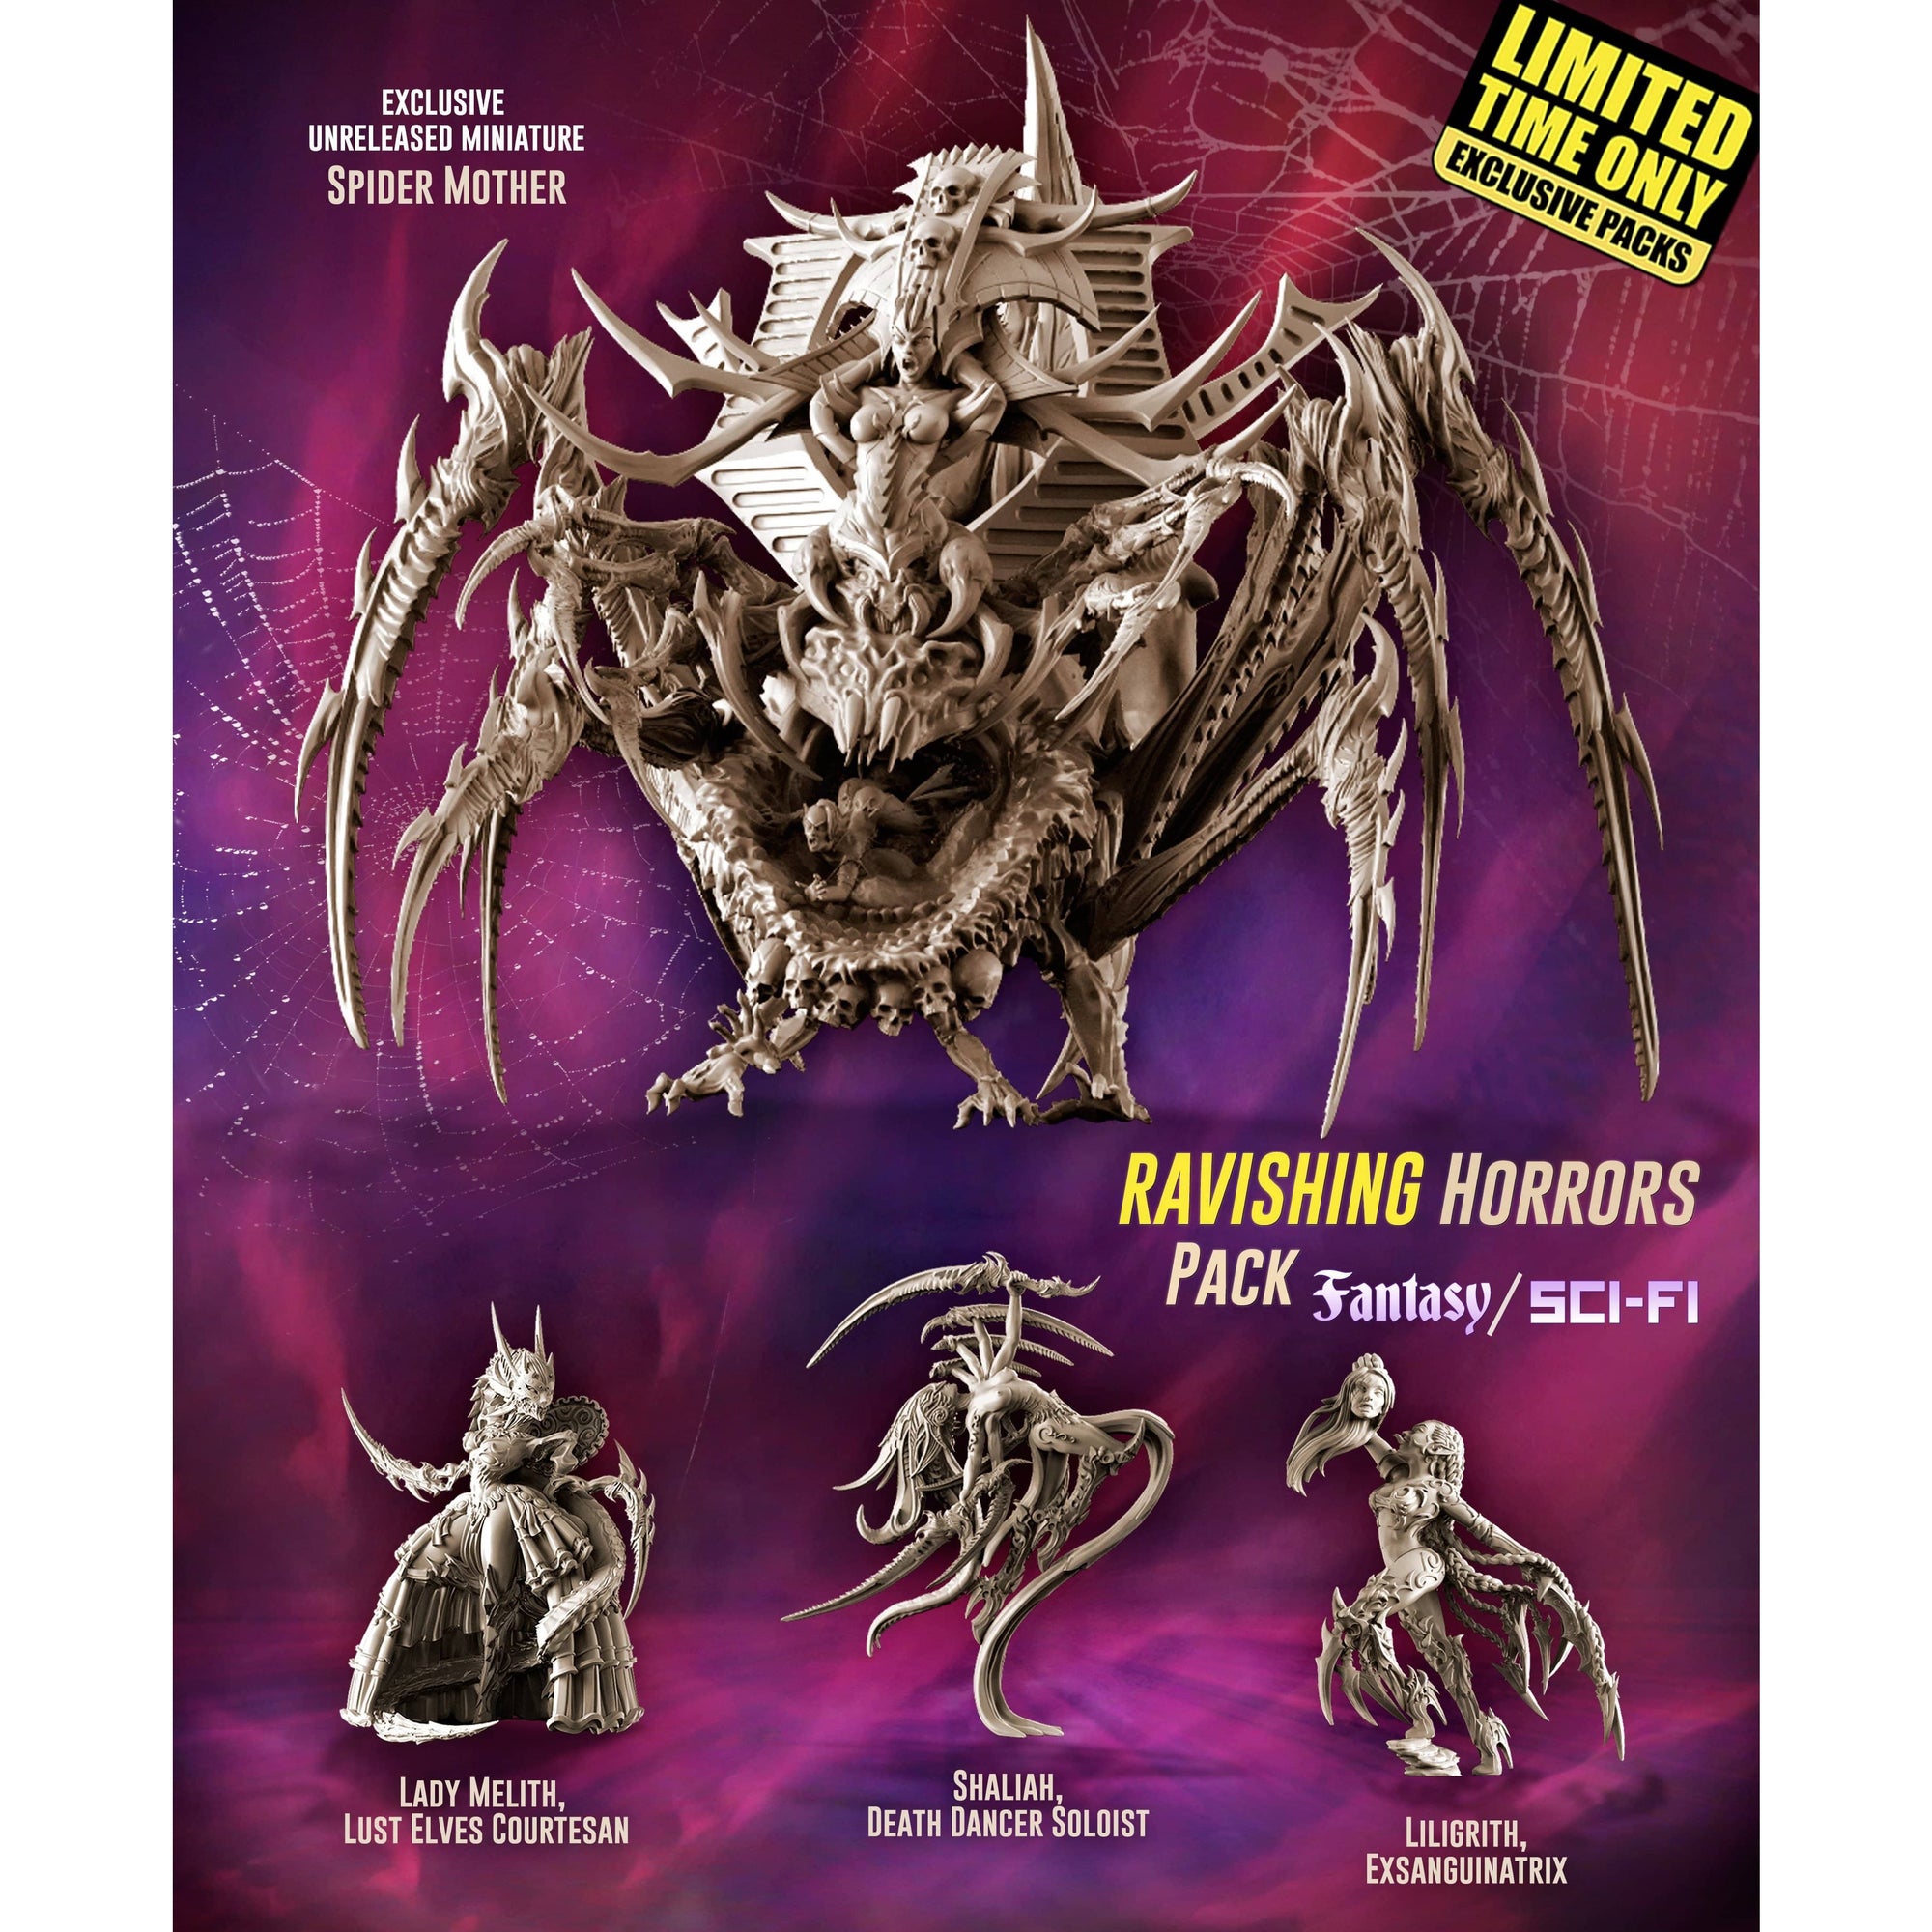 Exclusieve Ravishing Horrors Pack (Le - FSF)